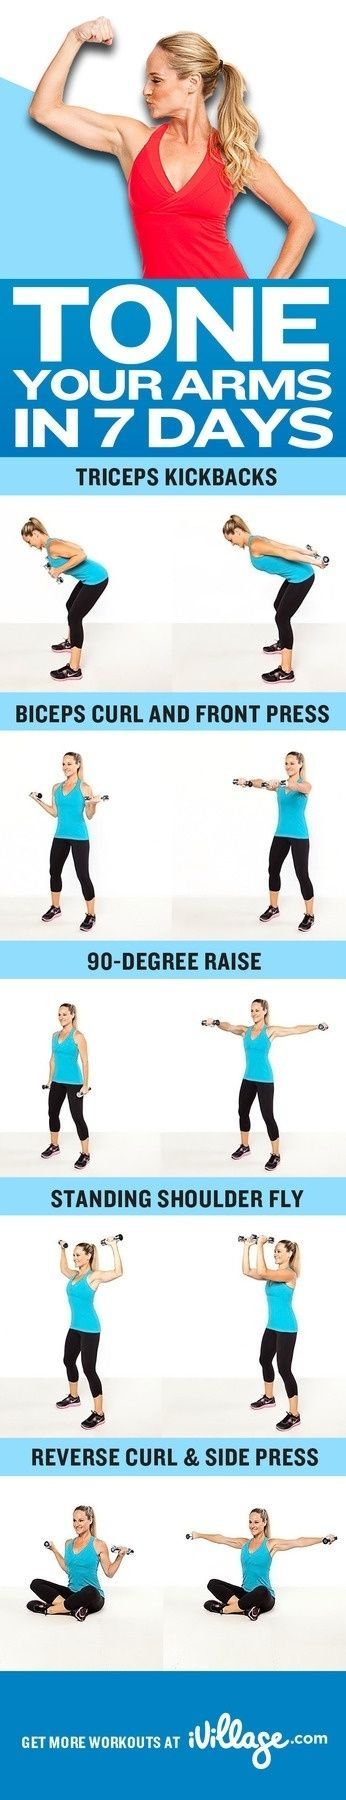 Tone your arms in 7 days with these easy workouts.-